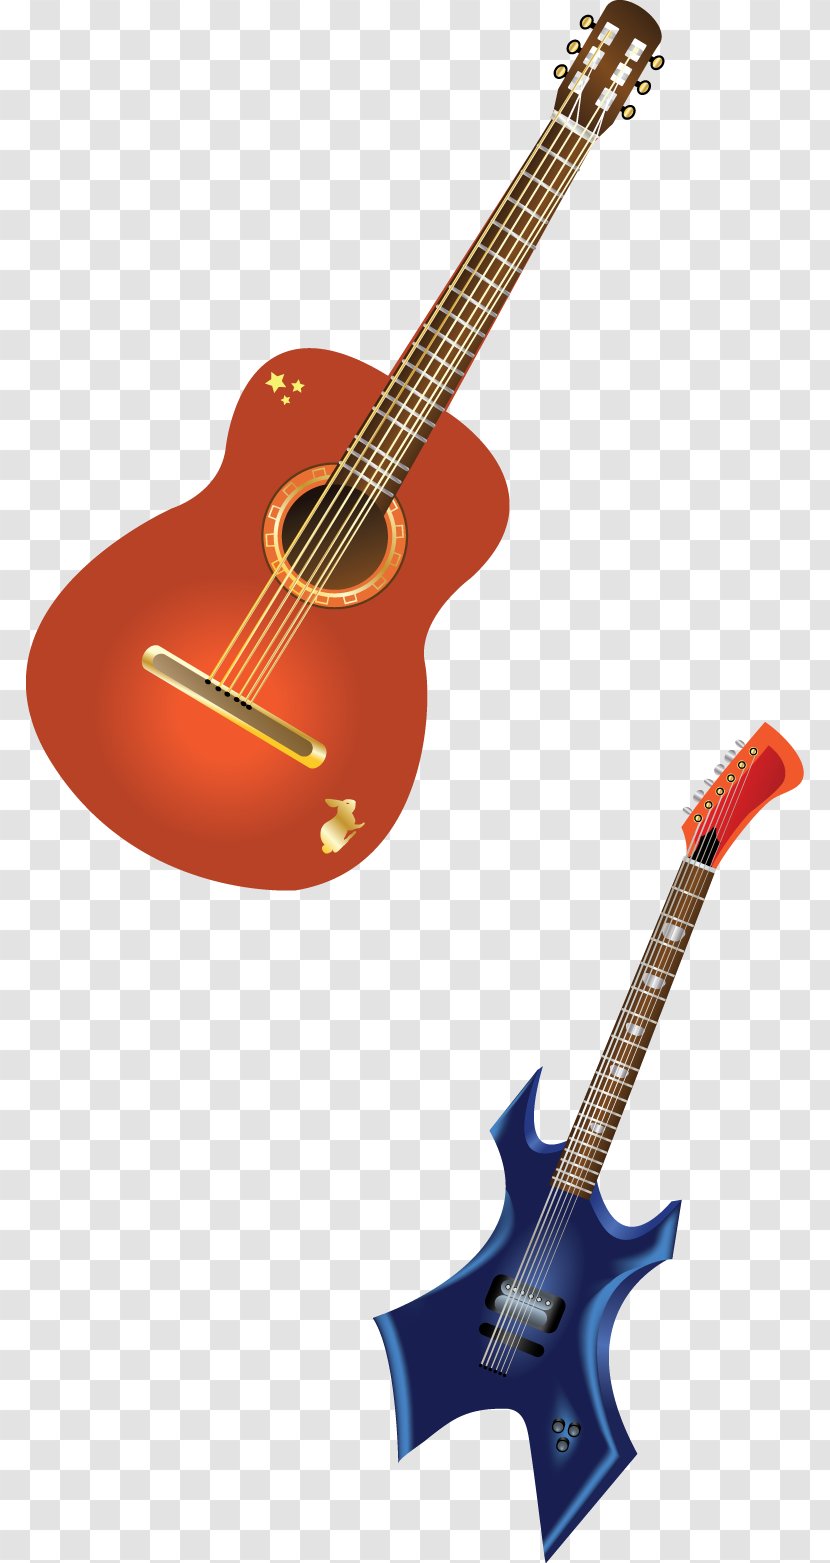 Gibson Les Paul Musical Instrument Guitar - Tree - Red Violin Vector Transparent PNG